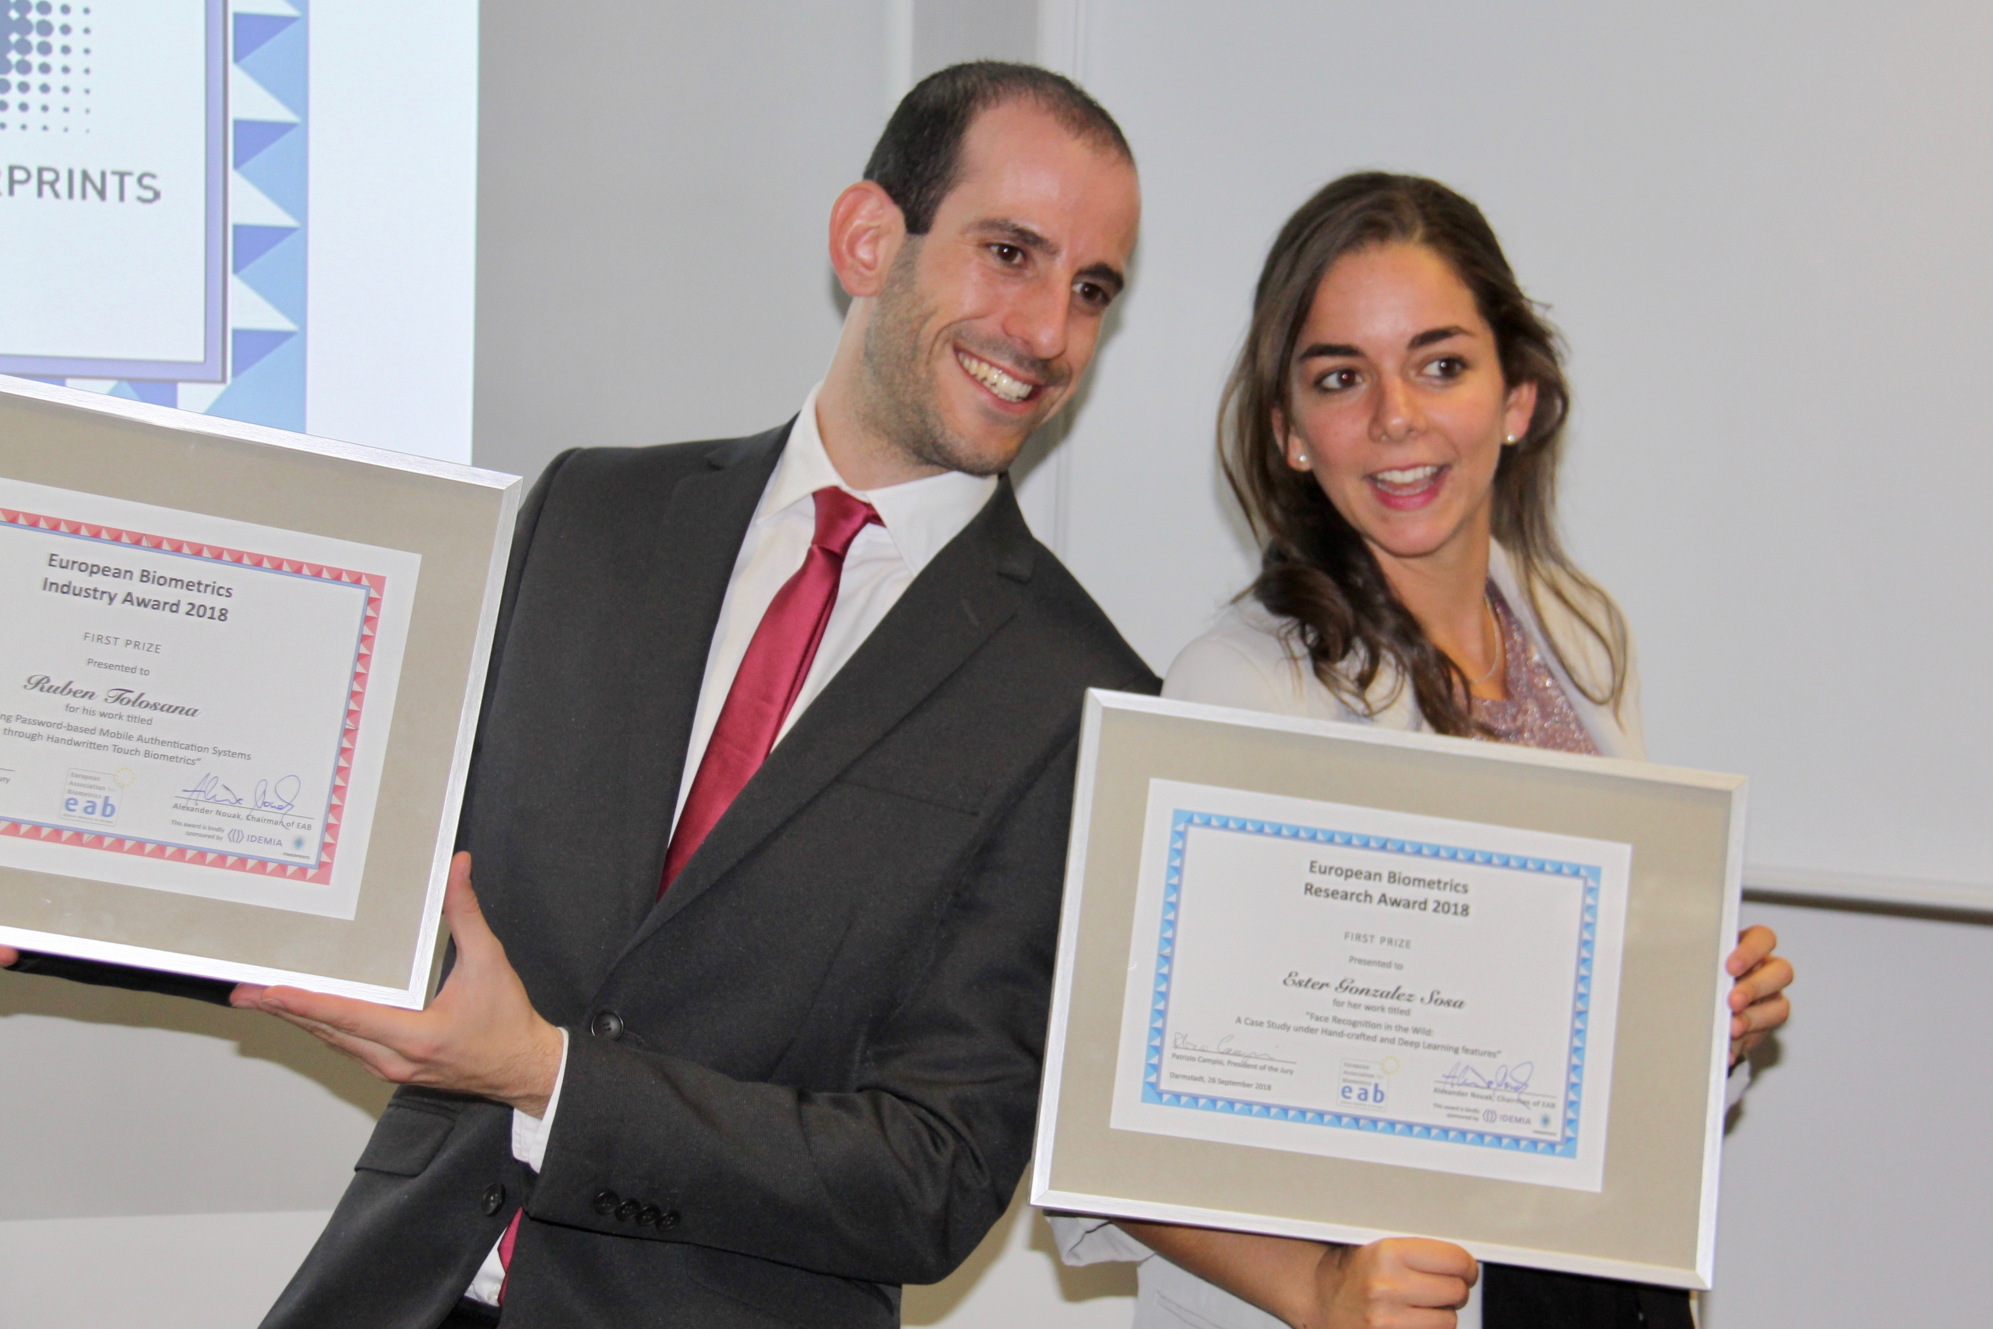 [Photo] Winner of the EAB Industry Award 2018, Ruben Tolosana, together with the winner of the EAB Research Award 2018, Ester Gonzalez